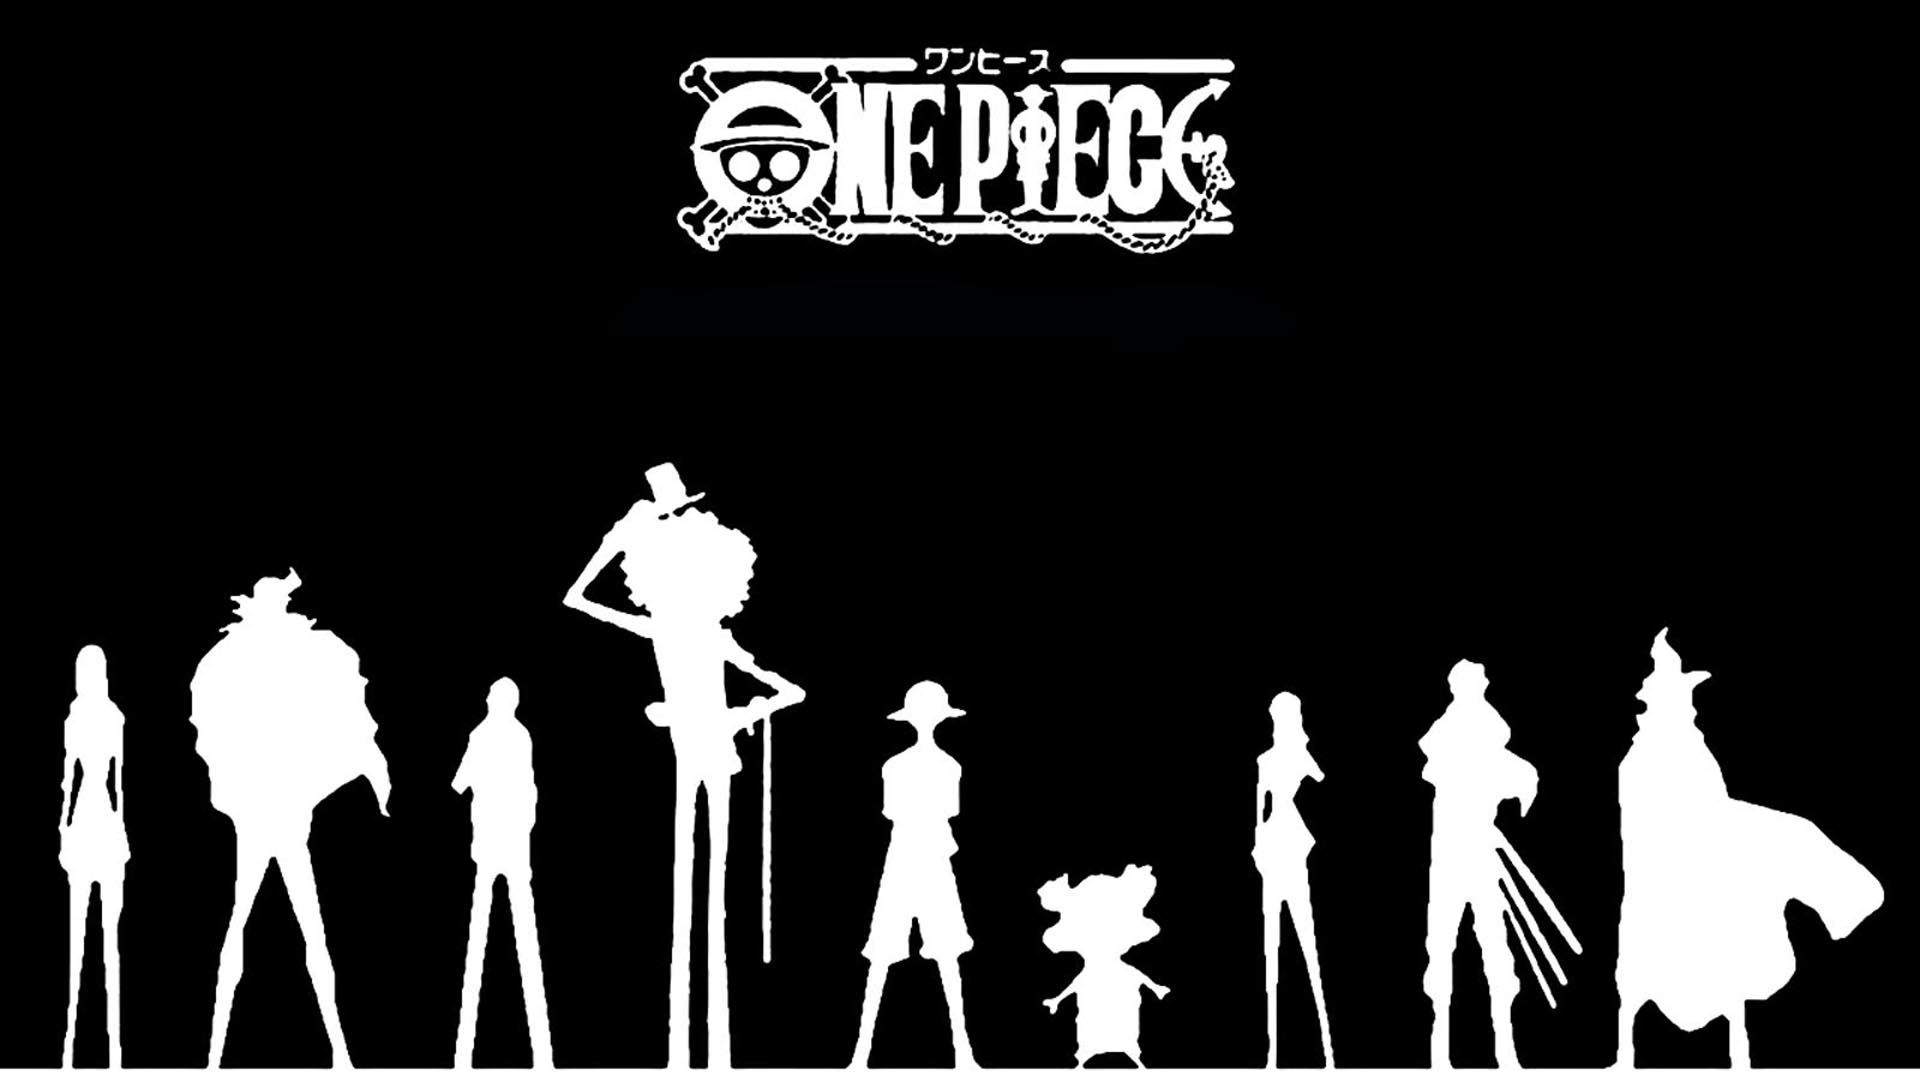 One Piece Black and White Wallpaper Free One Piece Black and White Background